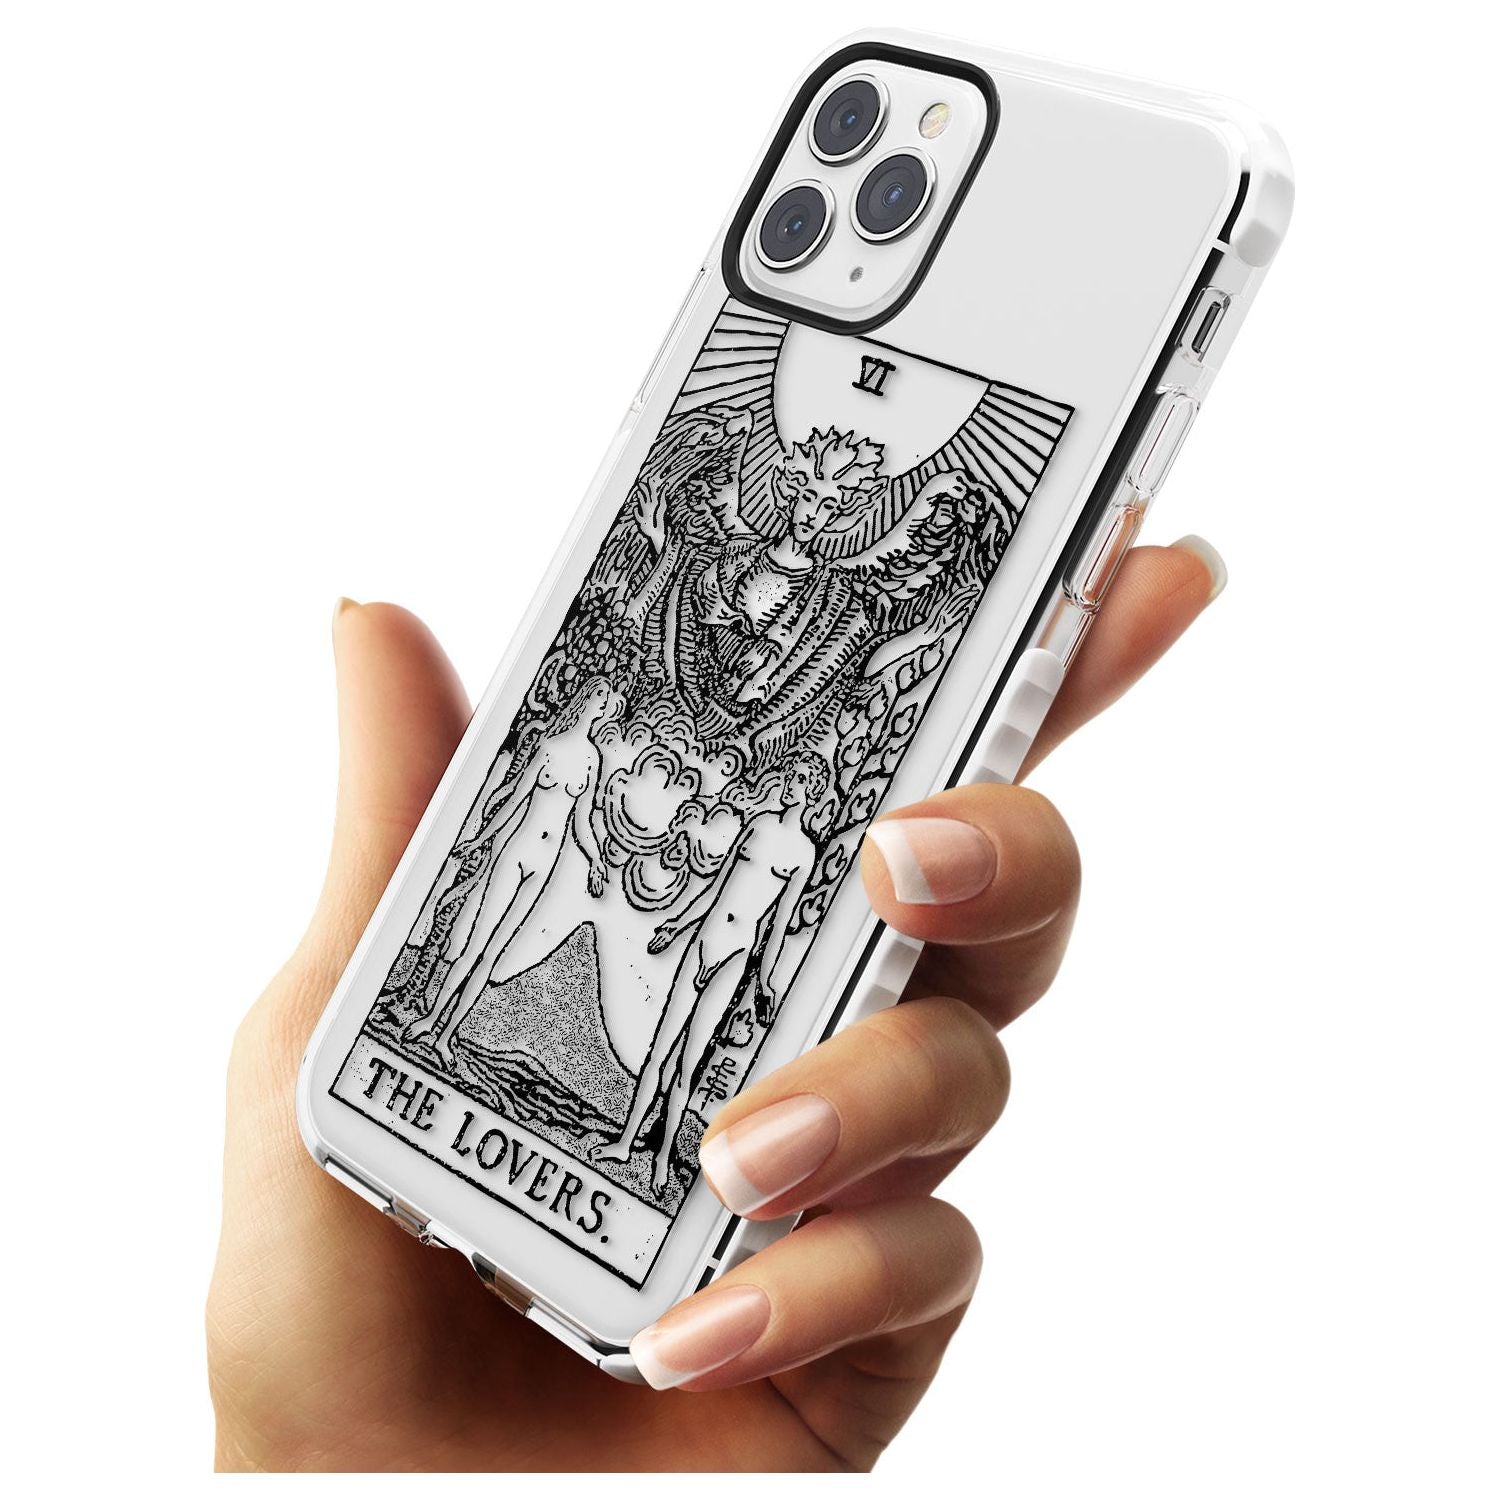 The Lovers Tarot Card - Transparent Slim TPU Phone Case for iPhone 11 Pro Max